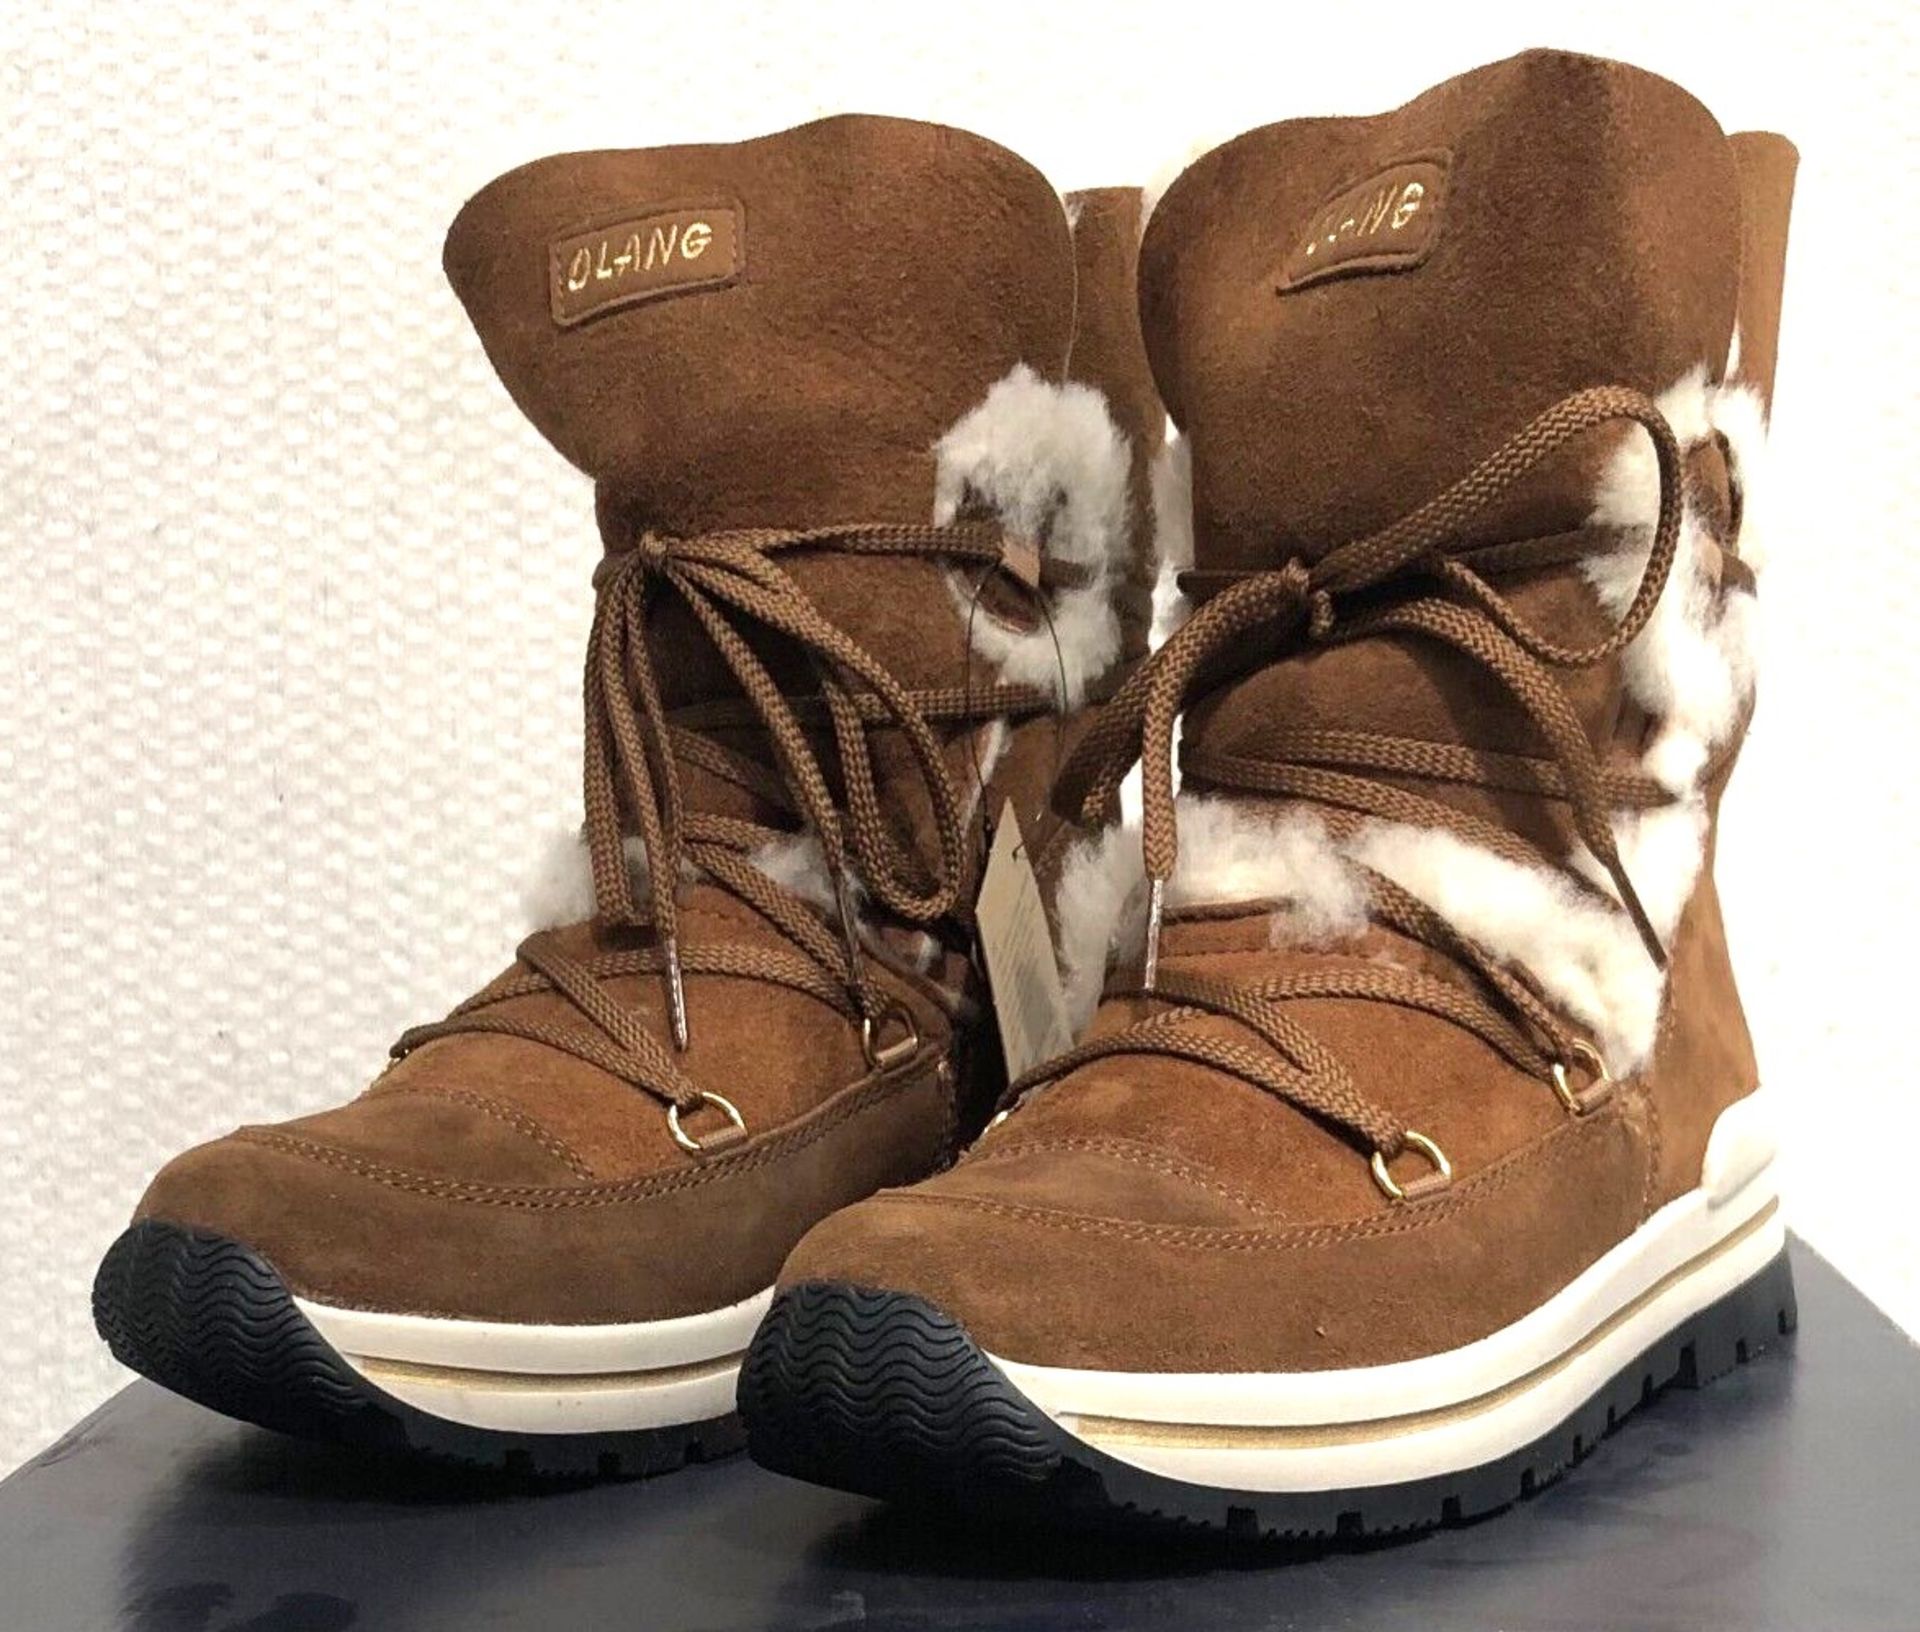 1 x Pair of Designer Olang Women's Winter Boots - Tanya 85 Cuoio - Euro Size 41 - New Boxed - Image 2 of 3